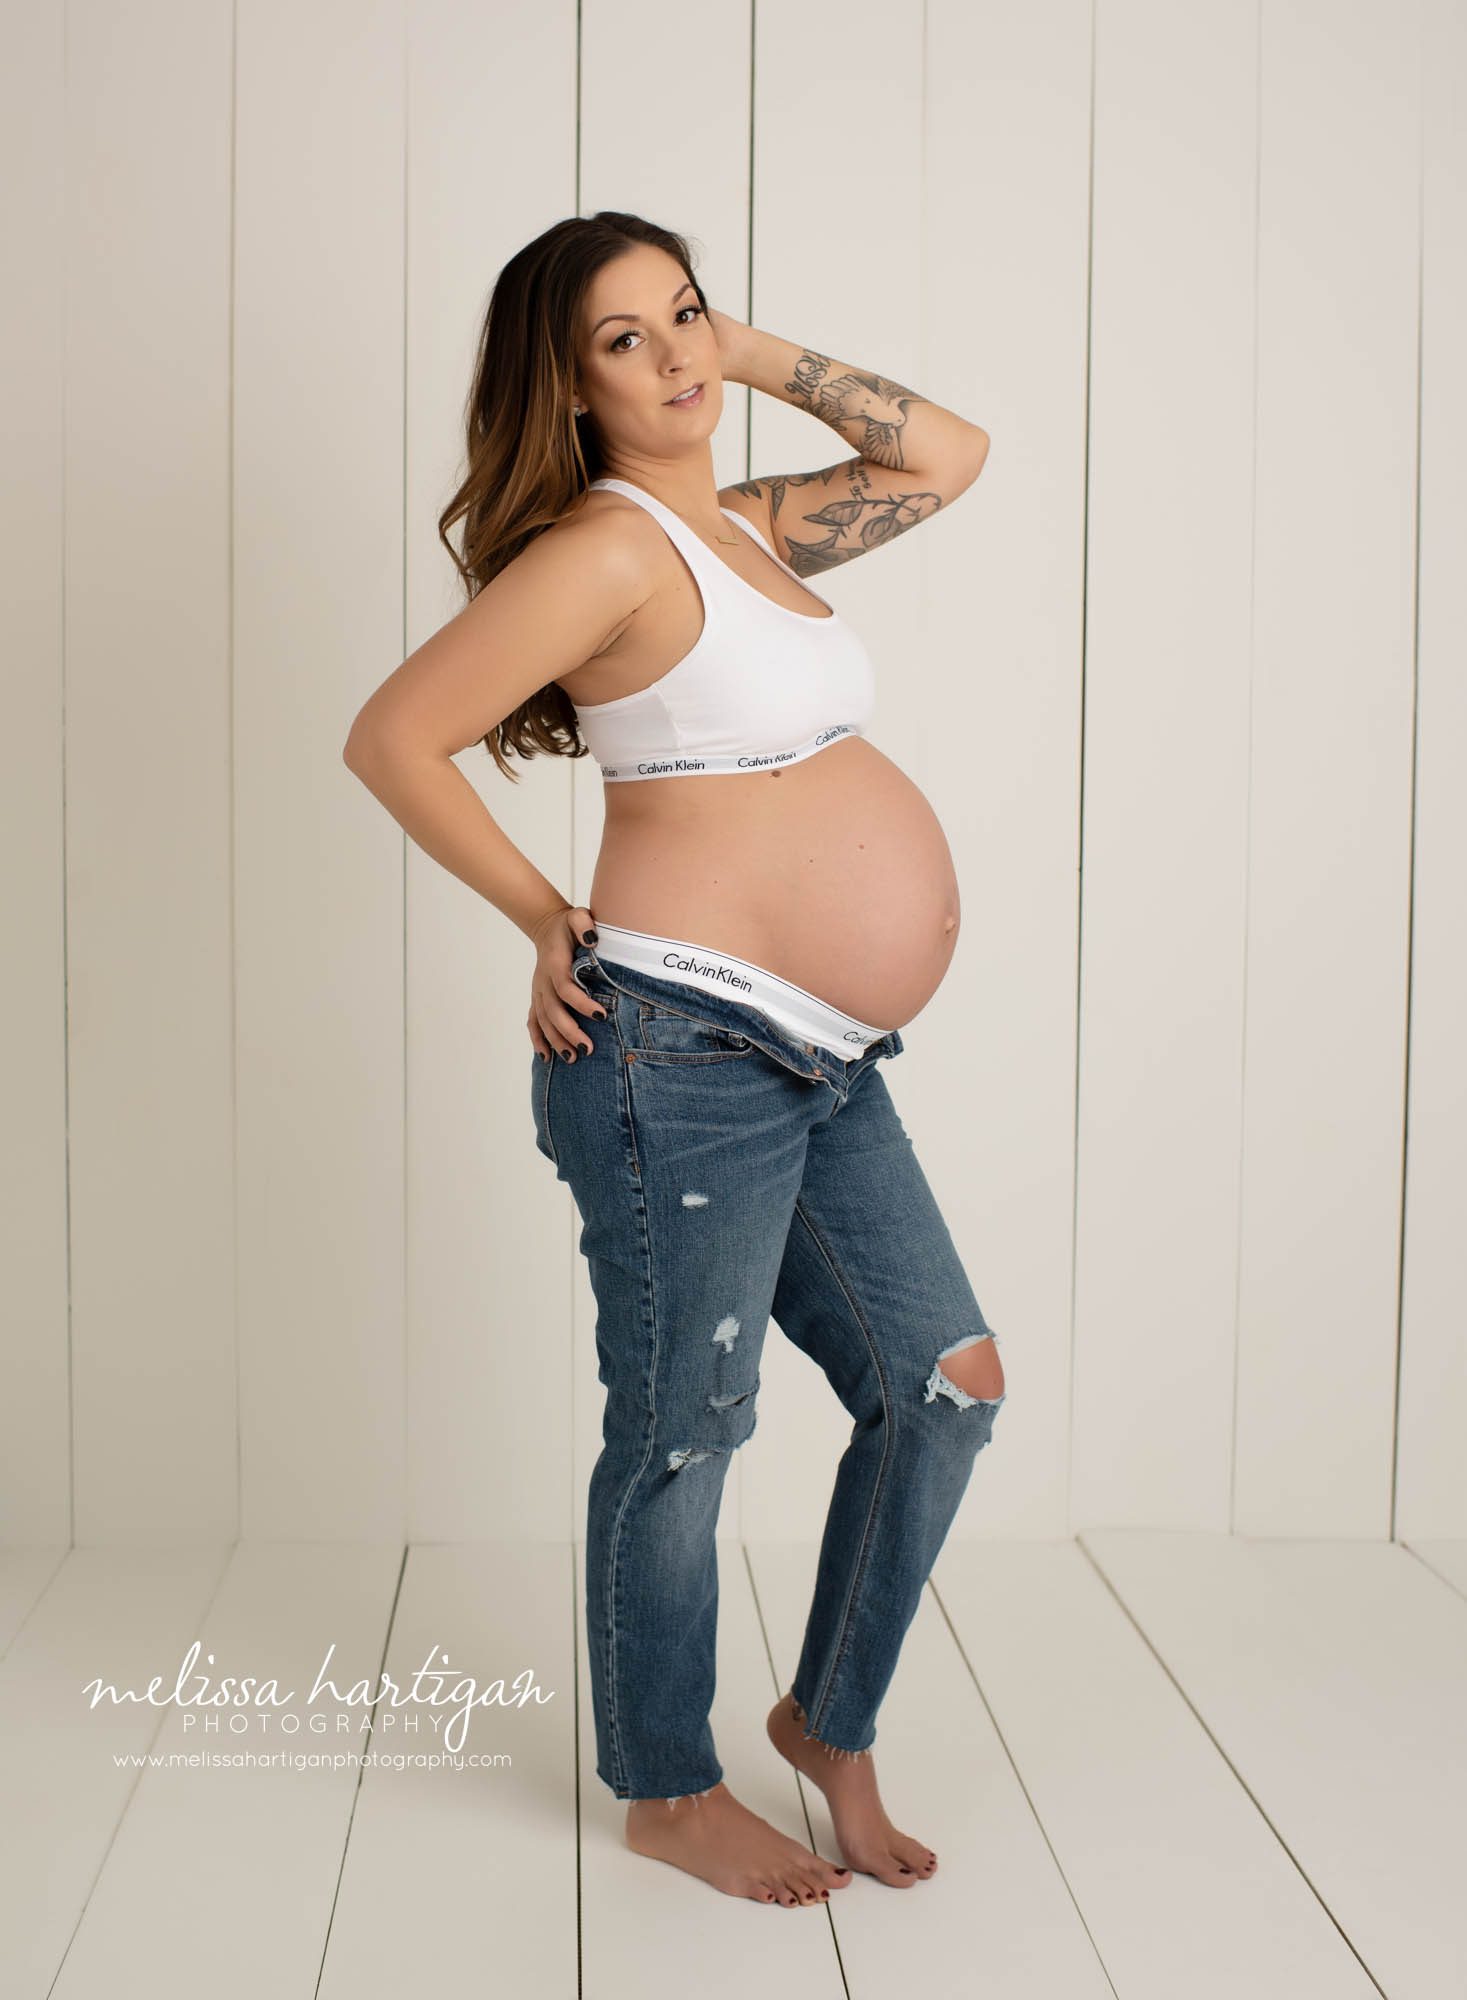 standing maternity photography pose mama wearing jeans unbuttoned wearing calvin klein sports bar and short set CT maternity Photographer